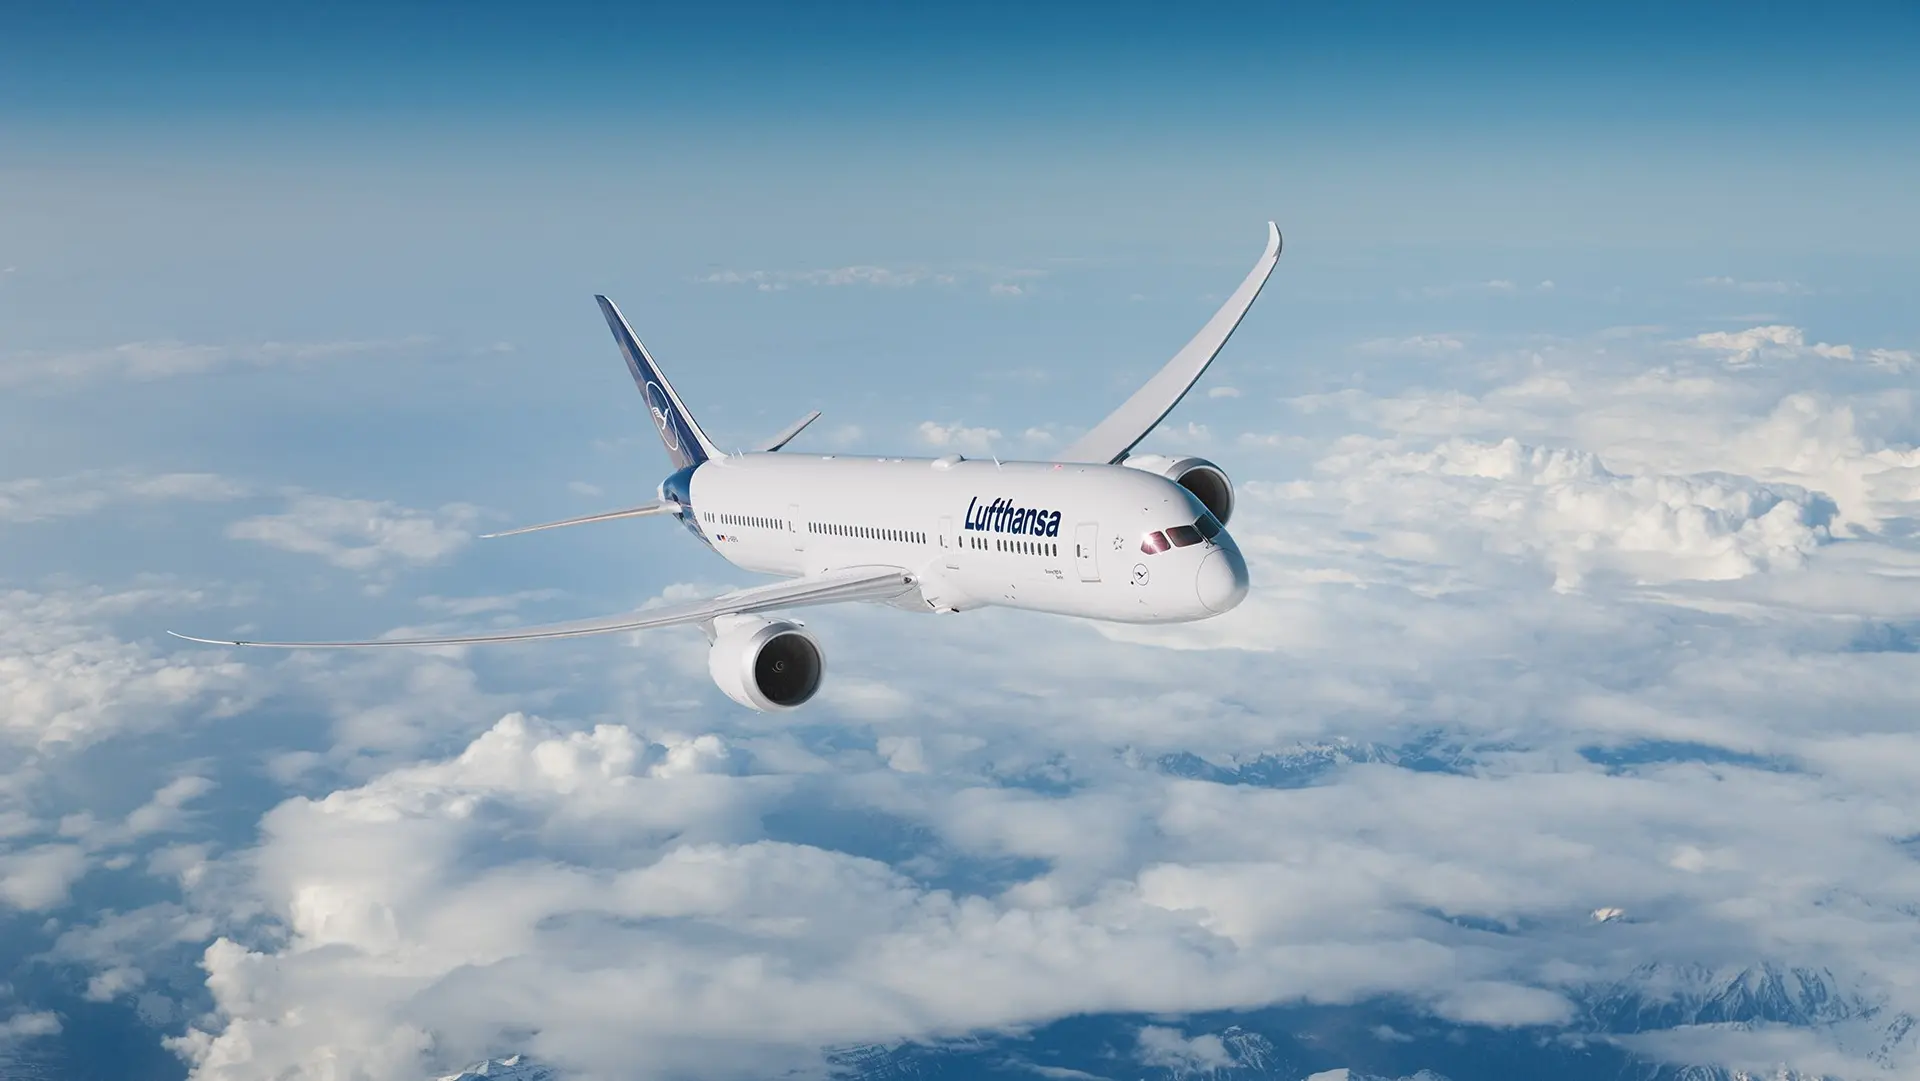 Airlines News - Lufthansa upgrades its Business Class product & orders new aircraft